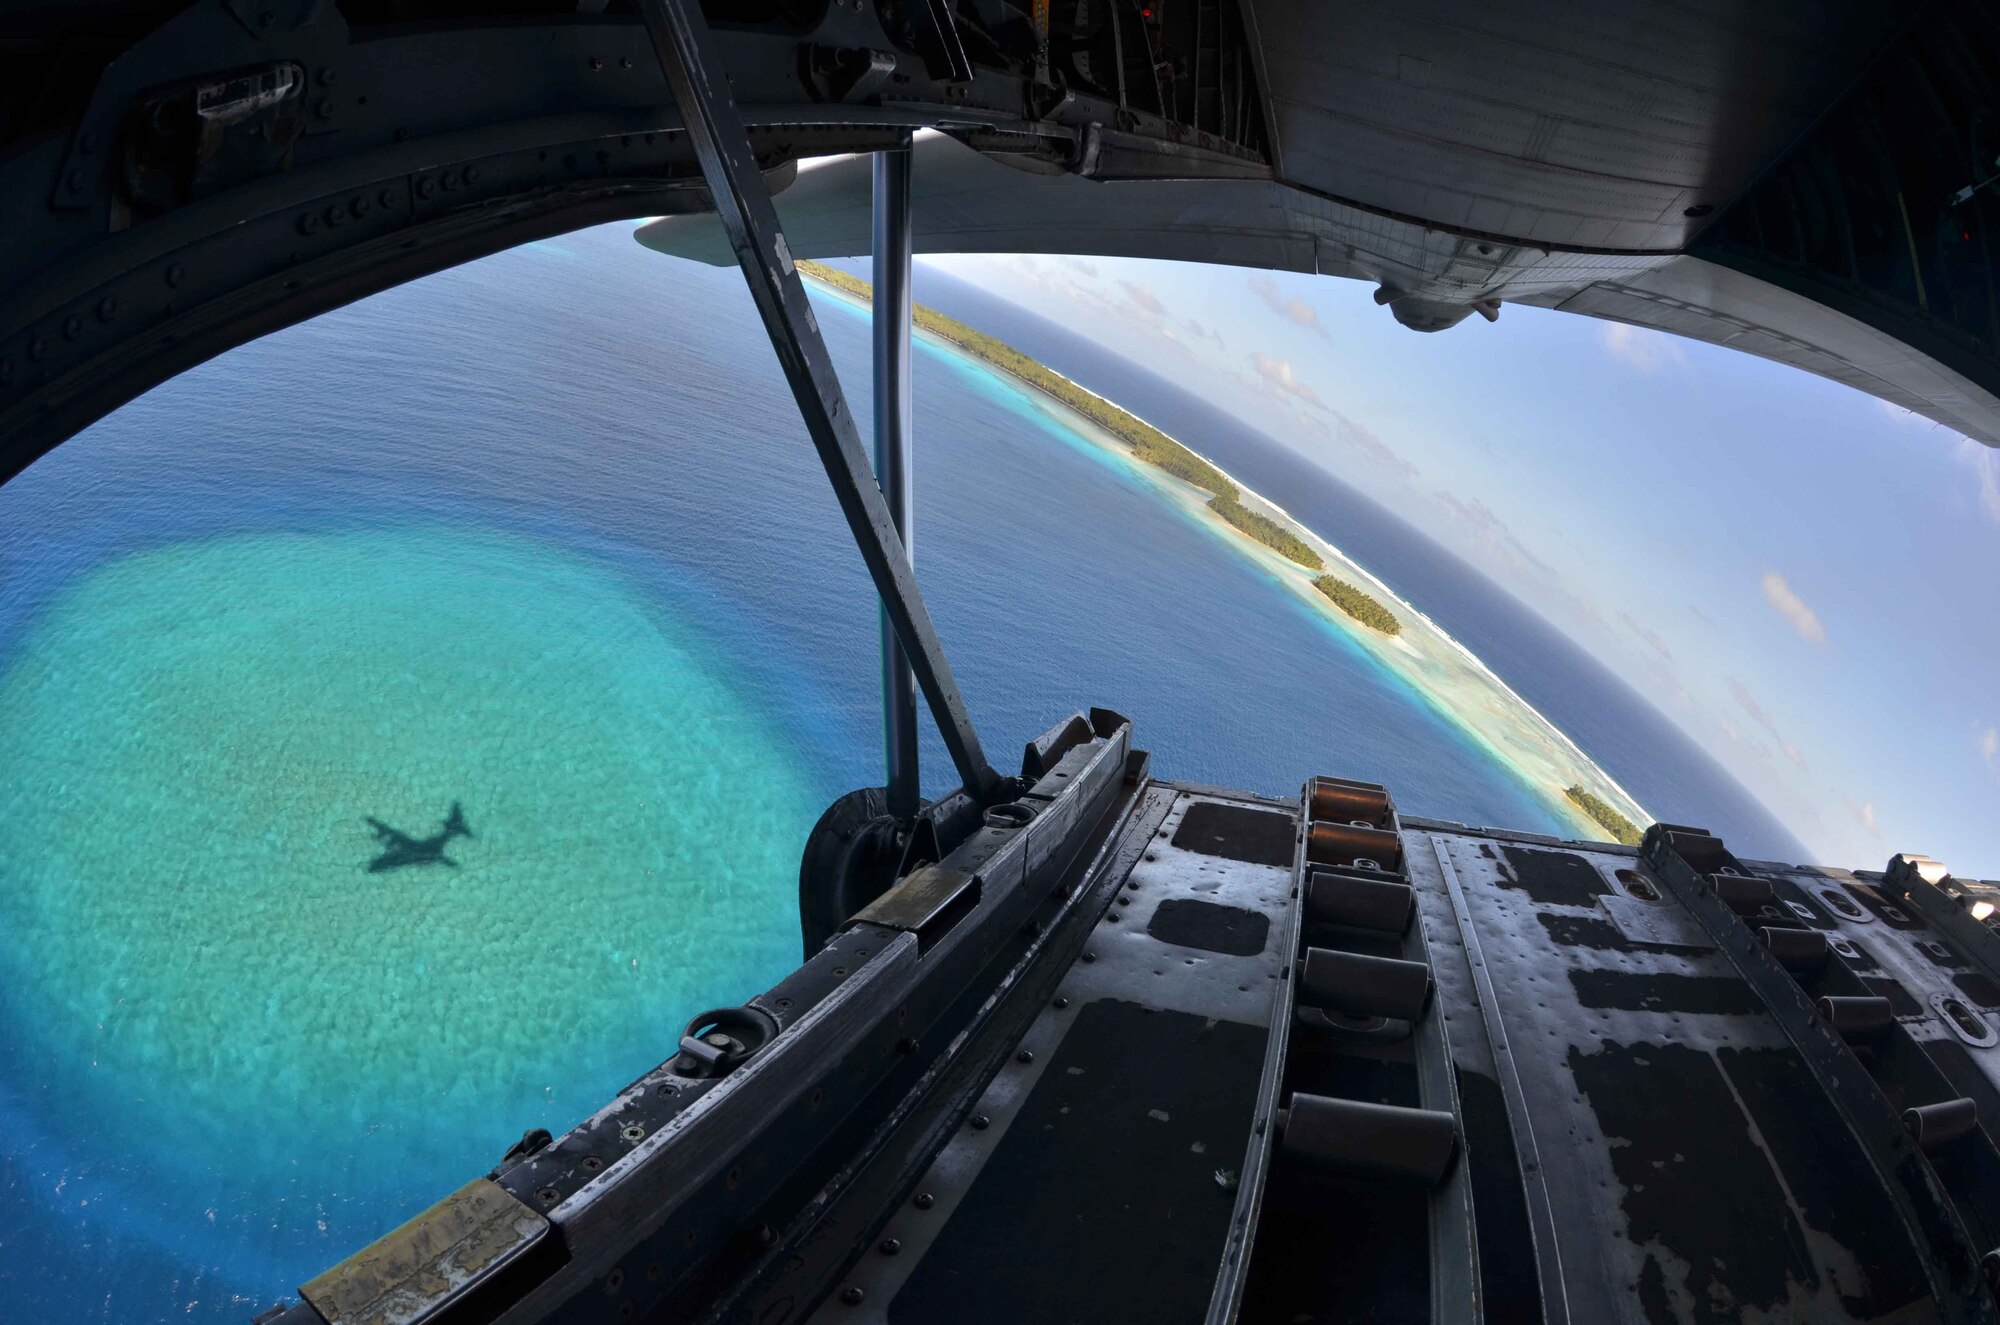 A Federated States of Micronesia island is seen in the distance as a U.S. Air Force C-130 Hercules turns back to ensure reception of a box of humanitarian assistance goods during an Operation Christmas Drop flight from Andersen Air Force Base, Guam, Dec. 14, 2012. Each year OCD provides aid to more than 30,000 islanders in Chuuk, Palau, Yap, Marshall Islands and Commonwealth of the Northern Mariana Islands. This year is the 61st anniversary of OCD, making it the longest running humanitarian mission in the world. In total, there are eight planned days of air drops, with 54 islands scheduled to receive humanitarian aid. (U.S. Air Force photo/Staff Sgt. Alexandre Montes/Released)